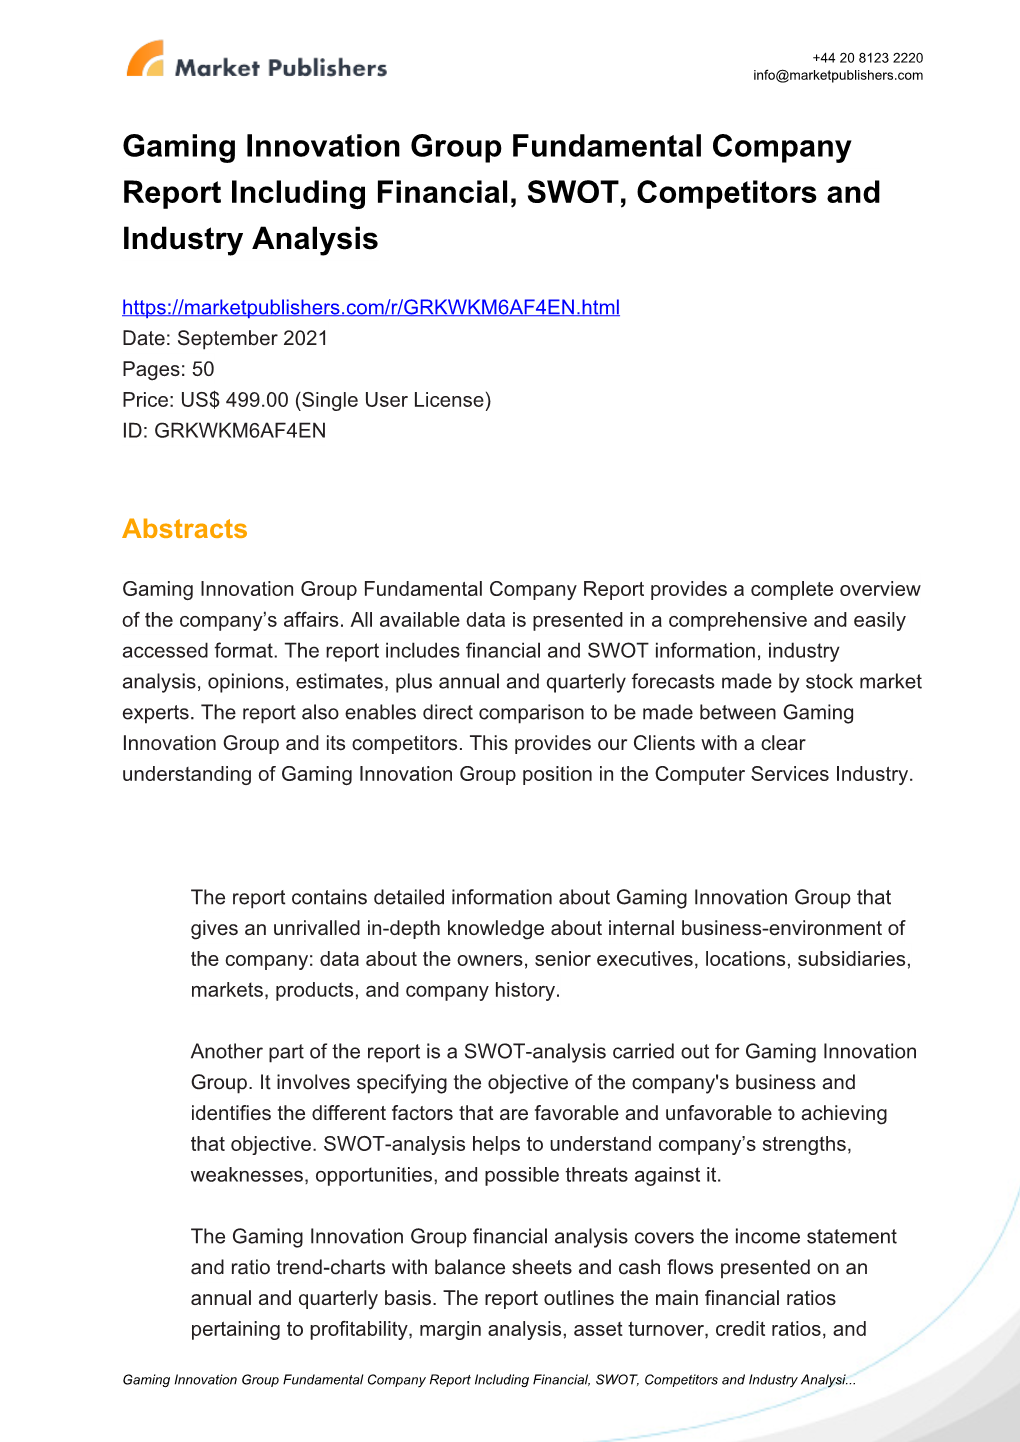 Gaming Innovation Group Fundamental Company Report Including Financial, SWOT, Competitors and Industry Analysis